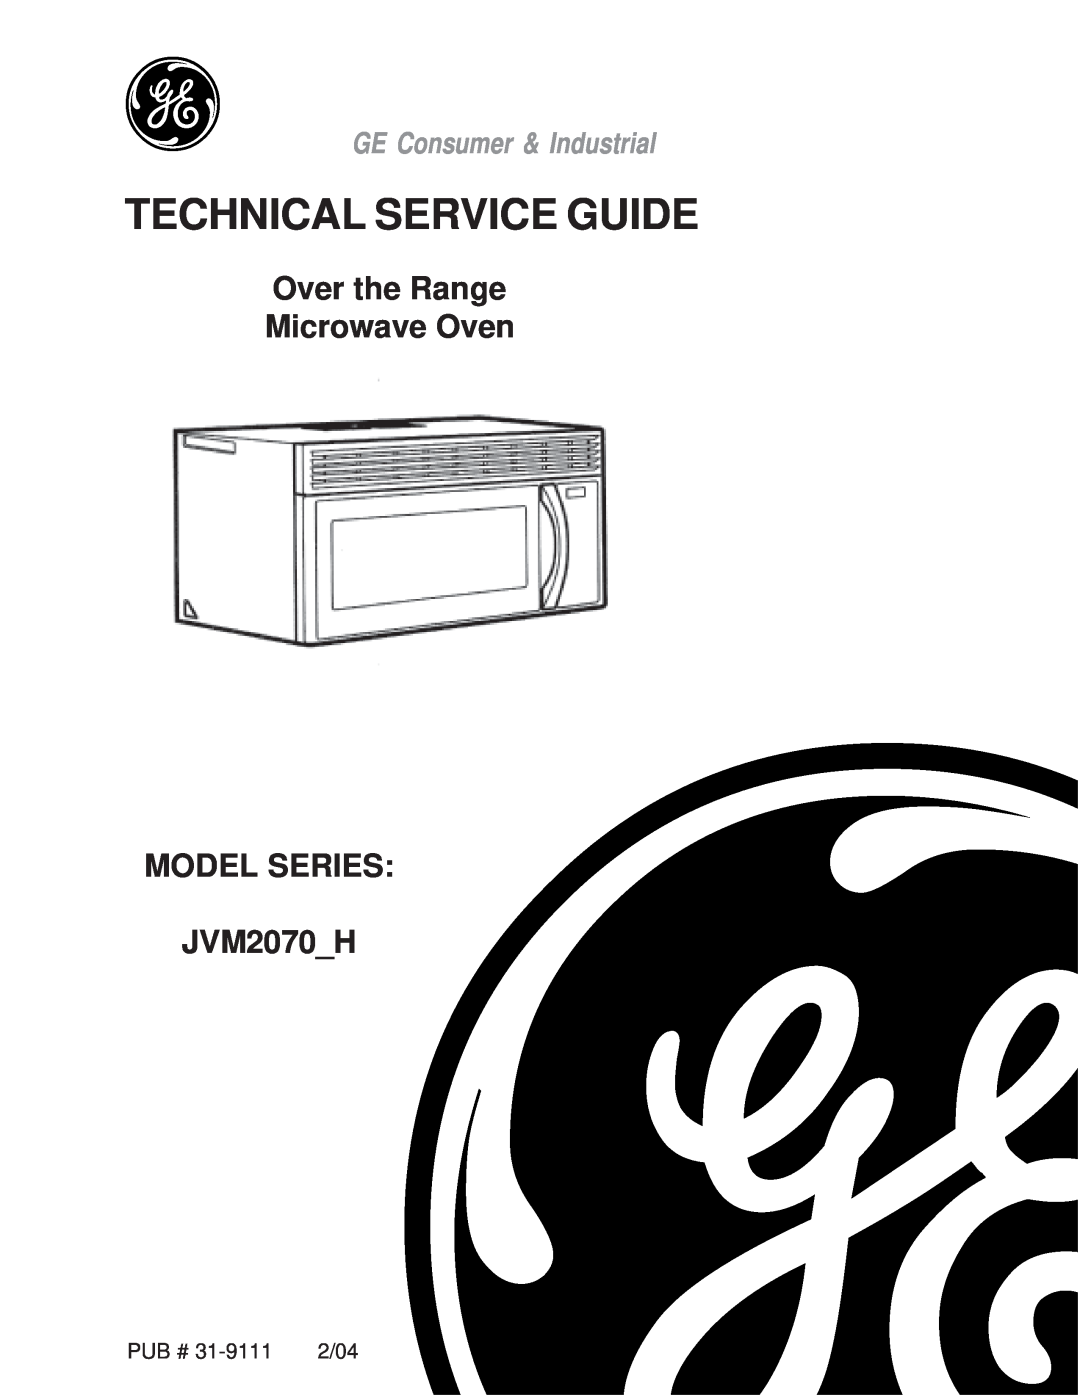 GE JVM2070_H manual Pub #, 2/04, Technical Service Guide, Over the Range Microwave Oven MODEL SERIES JVM2070H 